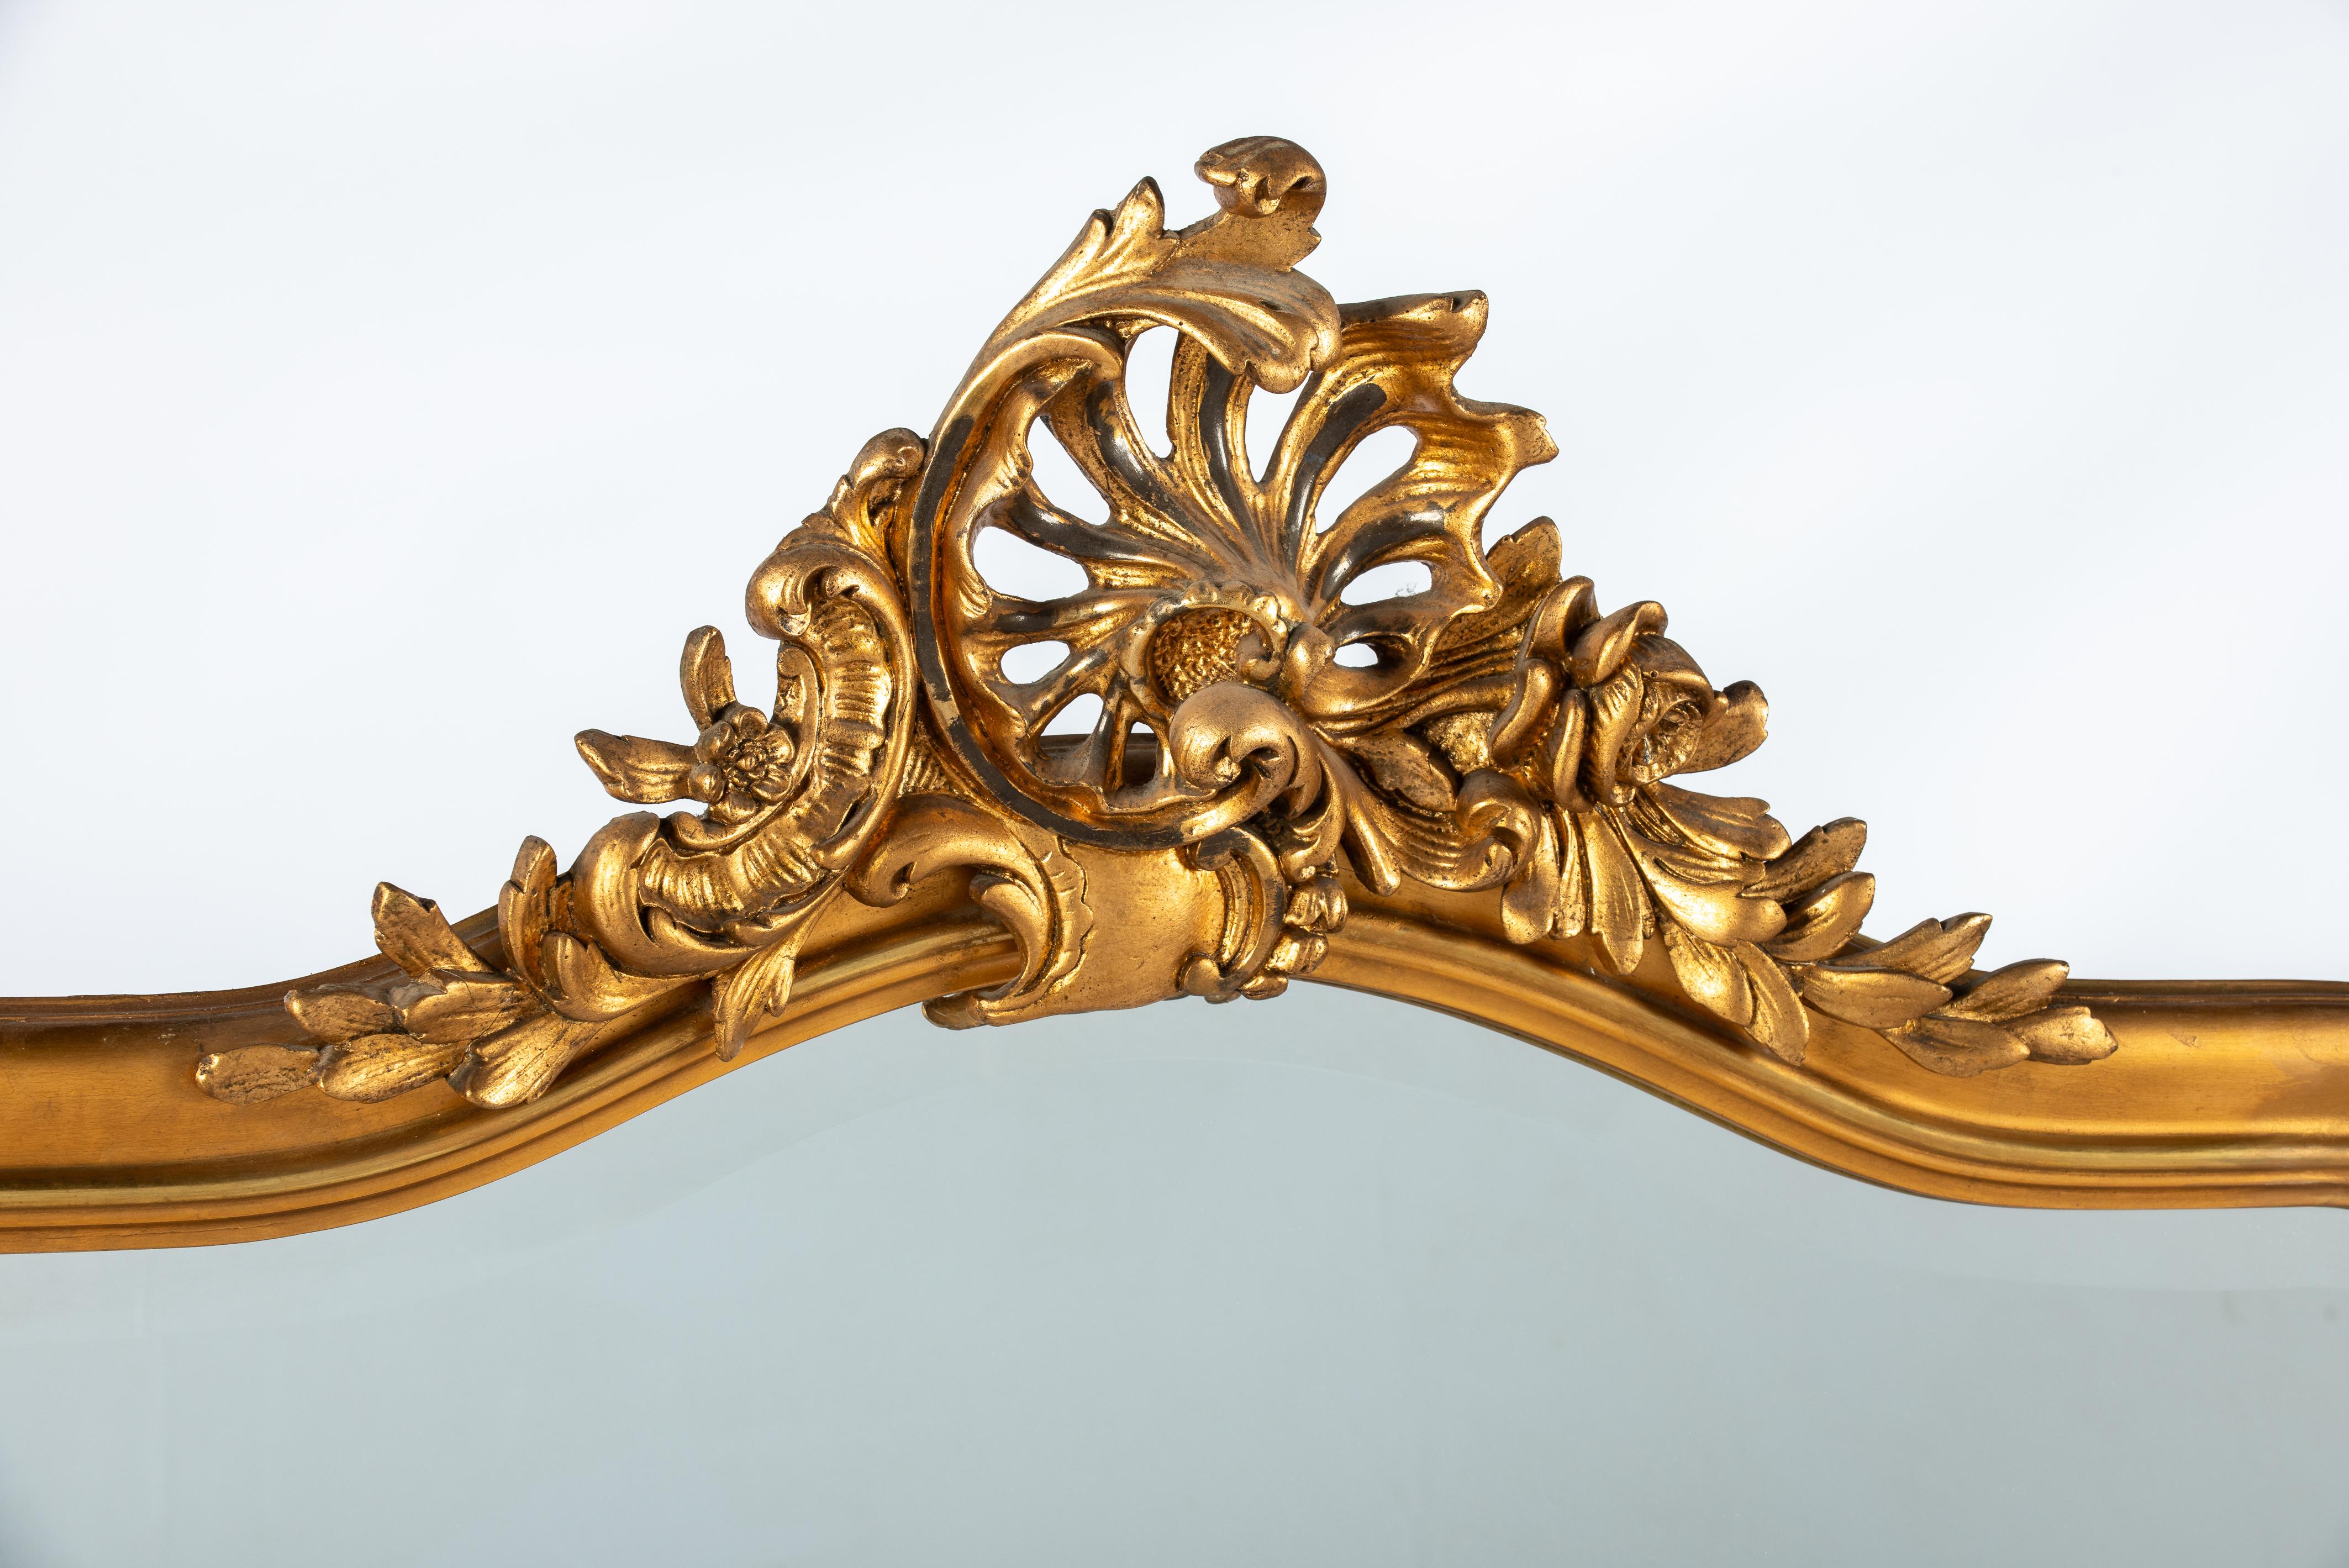 On offer here is a large antique French gold gilded mirror in Louis Quinze or Rococo style. The mirror was made in Northern France in the early 20th century, circa 1900.  It has the asymmetrical ornamentation typical for Louis Quinze and Rococo